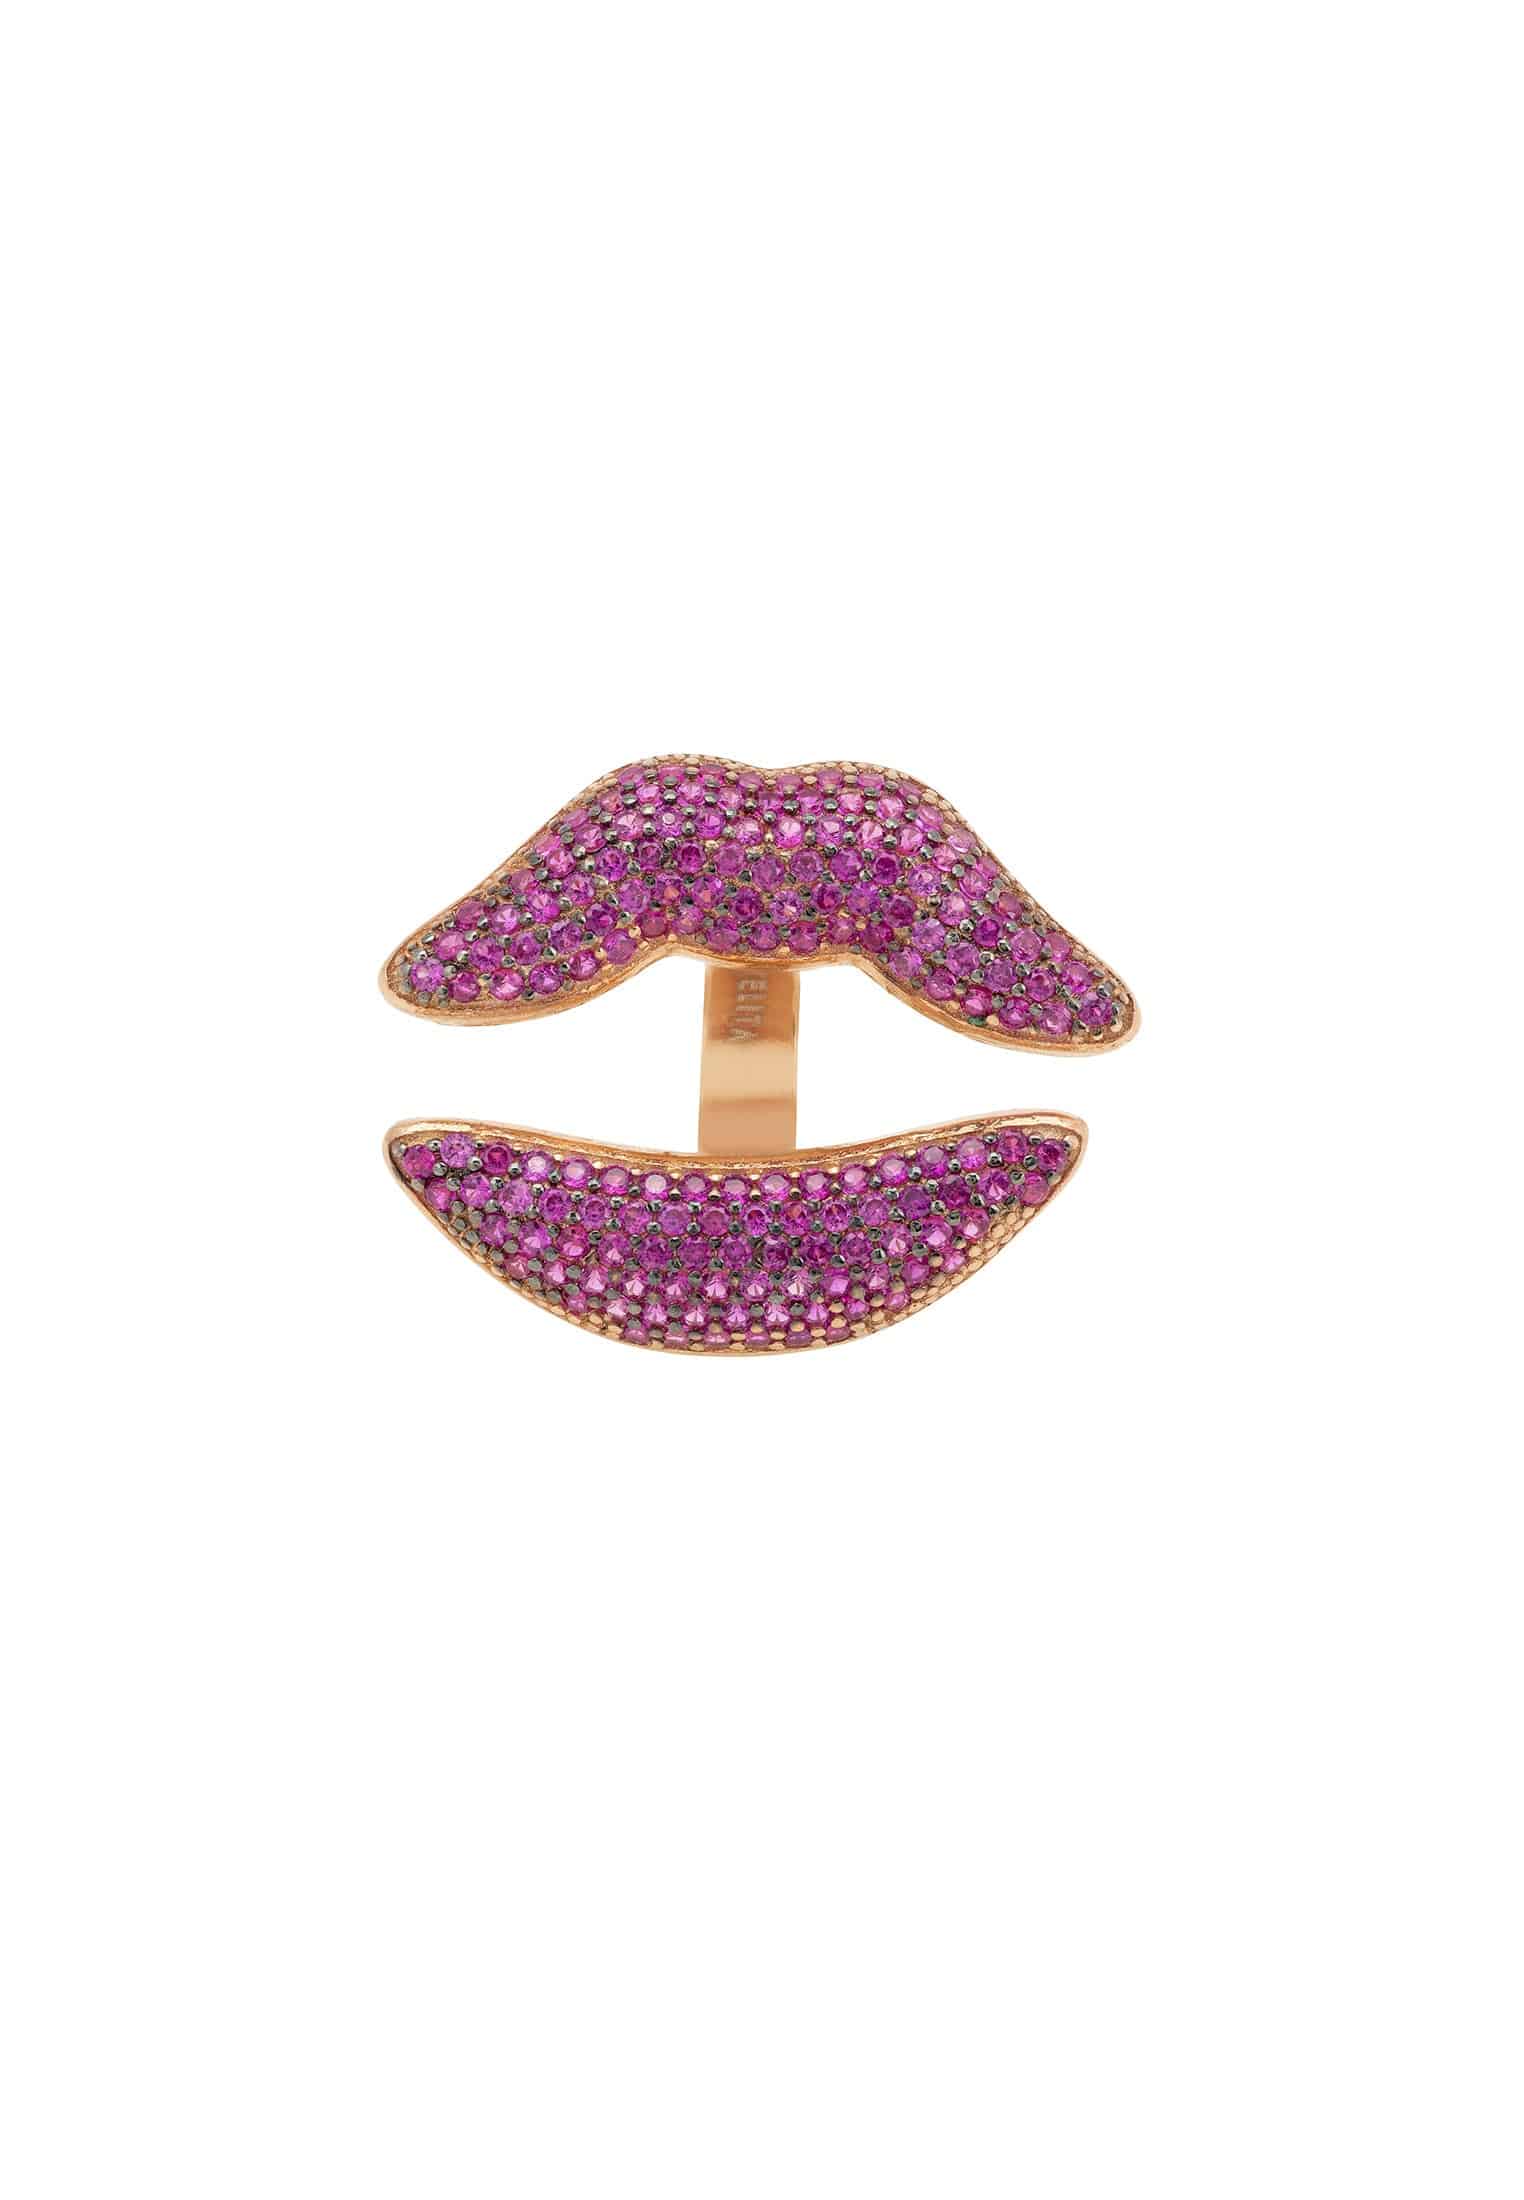 Rosegold Lips Ring with Pink-Red Cubic Zirconia - Playful Statement Piece for Everyday Styling and Gifts - Jewelry & Watches - Bijou Her -  -  - 